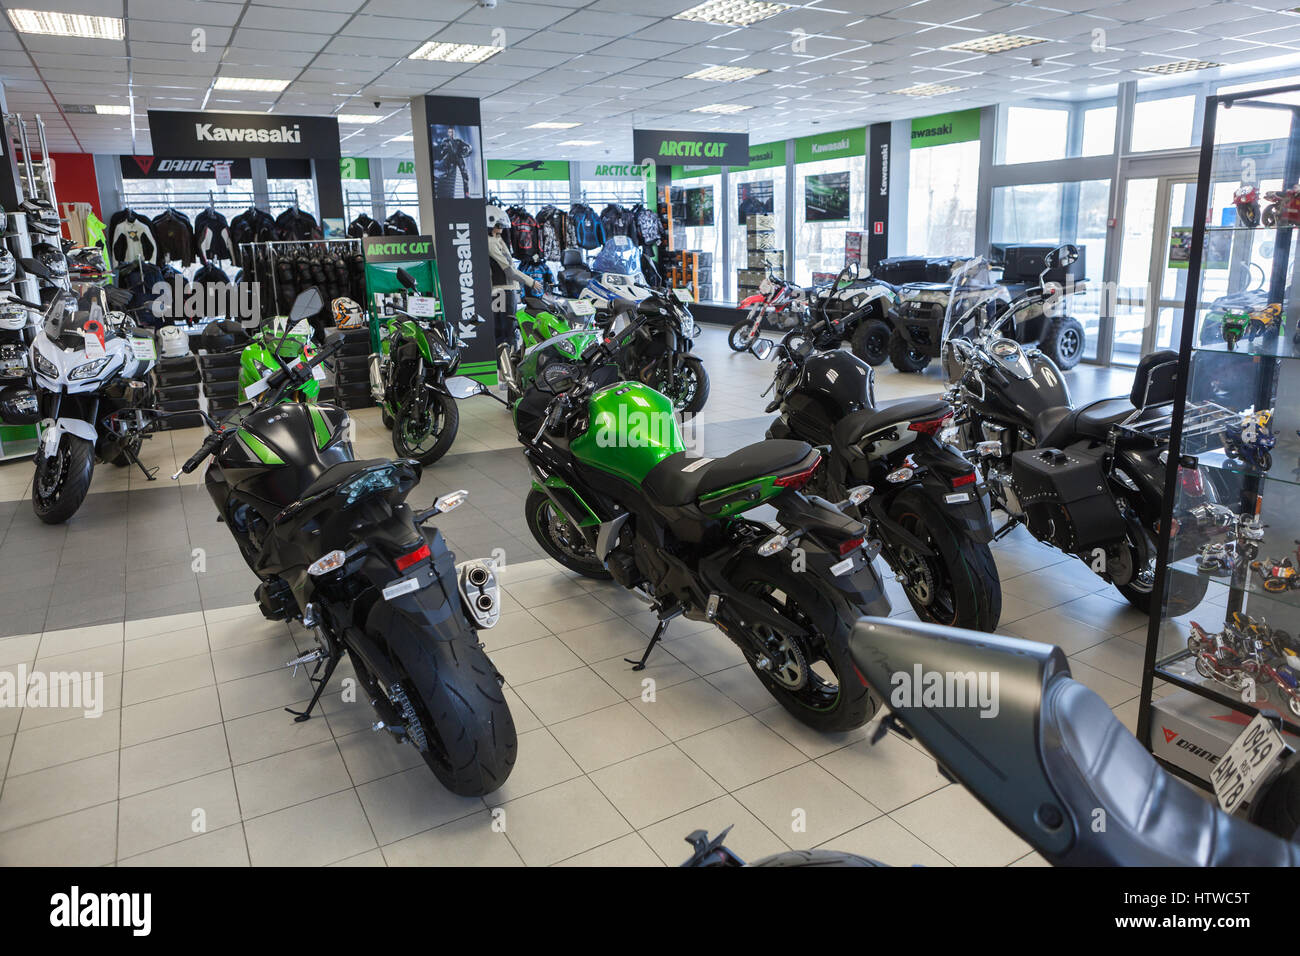 ST. PETERSBURG, RUSSIA - CIRCA FEB, 2017: New street motorbikes of Kawasaki brand are on sale in motorcycle store. Official dealership of Kawasaki and Stock Photo -